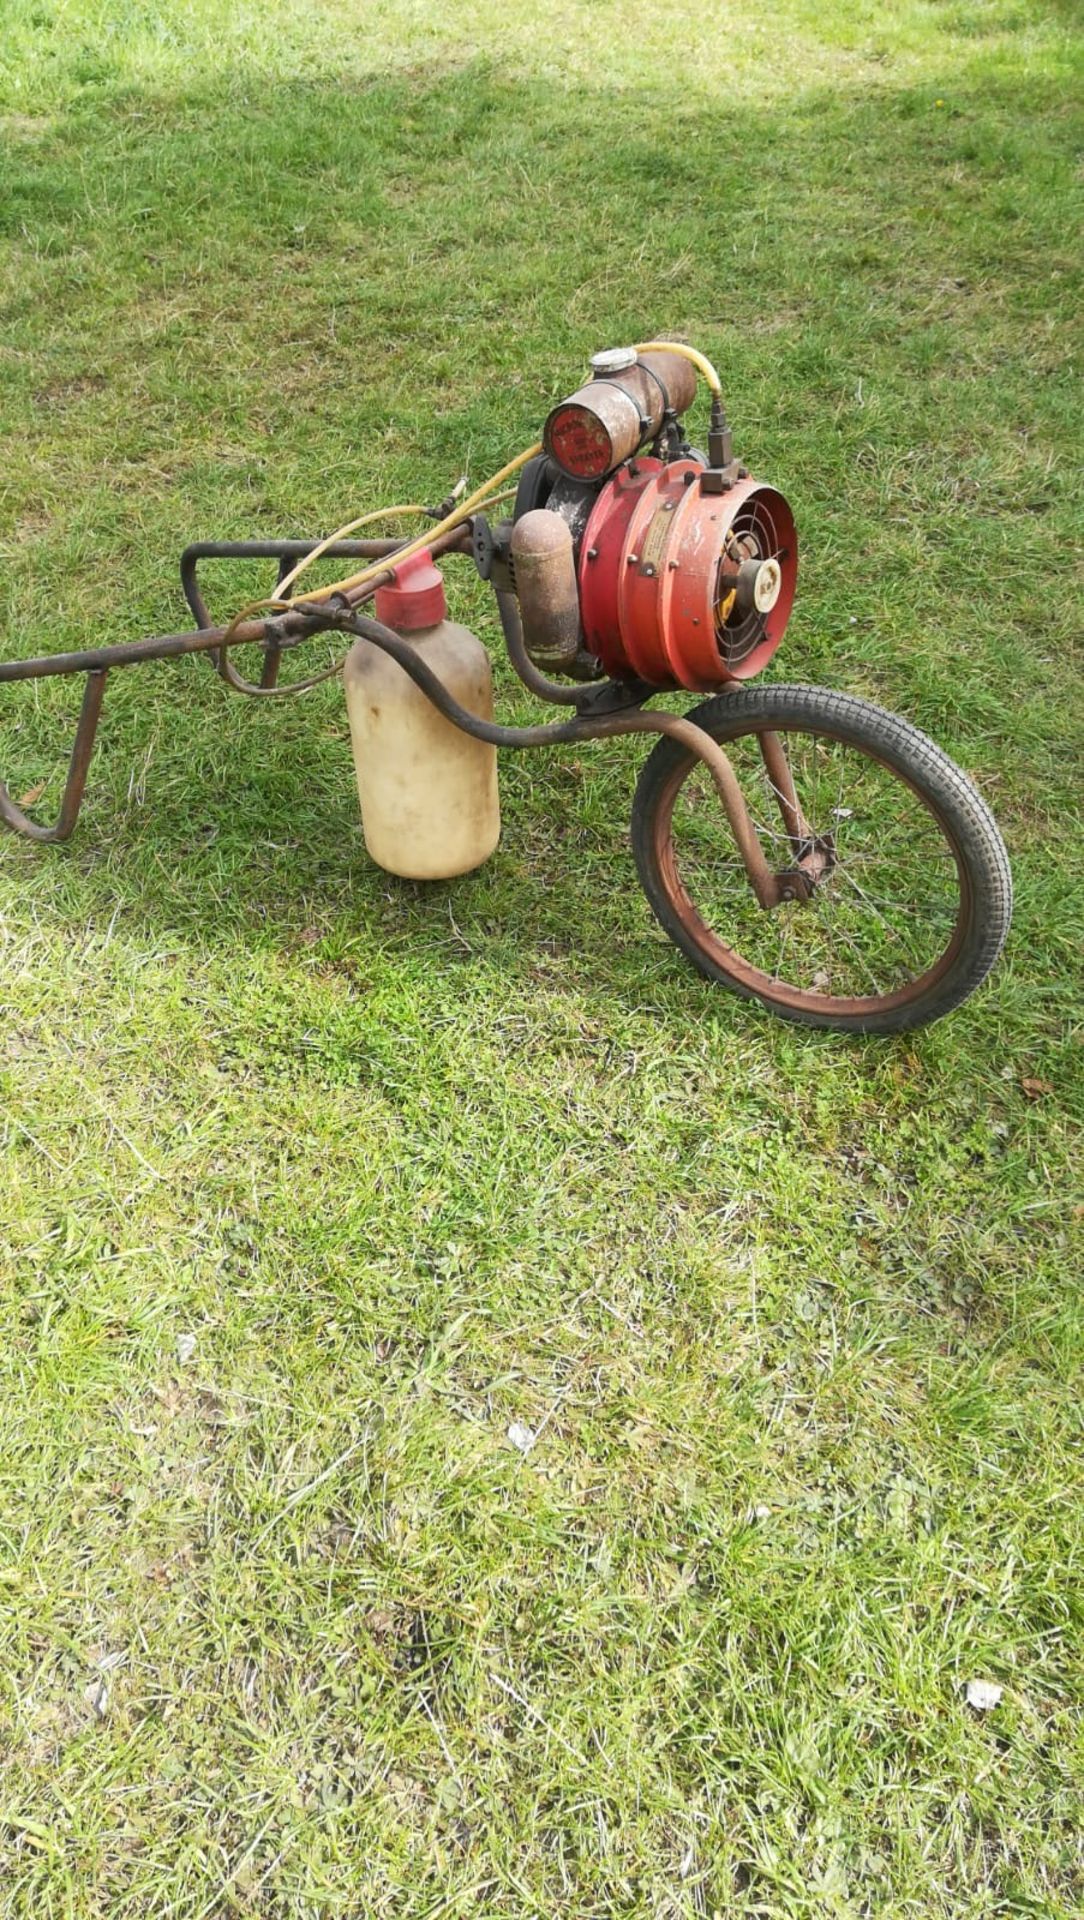 Micronette sprayer, 2 stroke engine free and complete but sold as seen - not had running. - Image 2 of 5